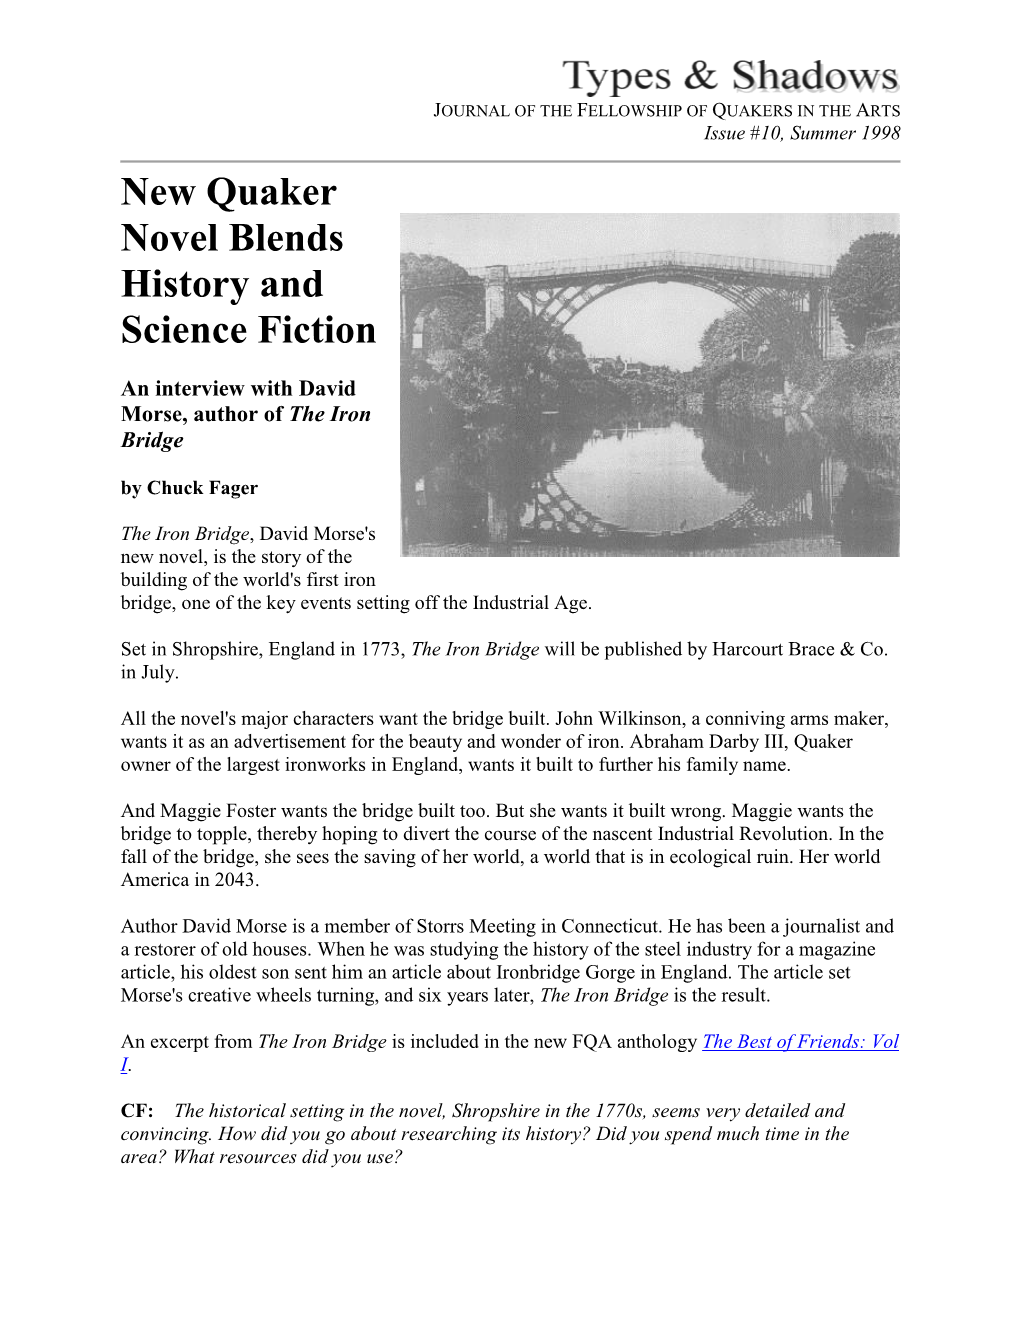 New Quaker Novel Blends History and Science Fiction